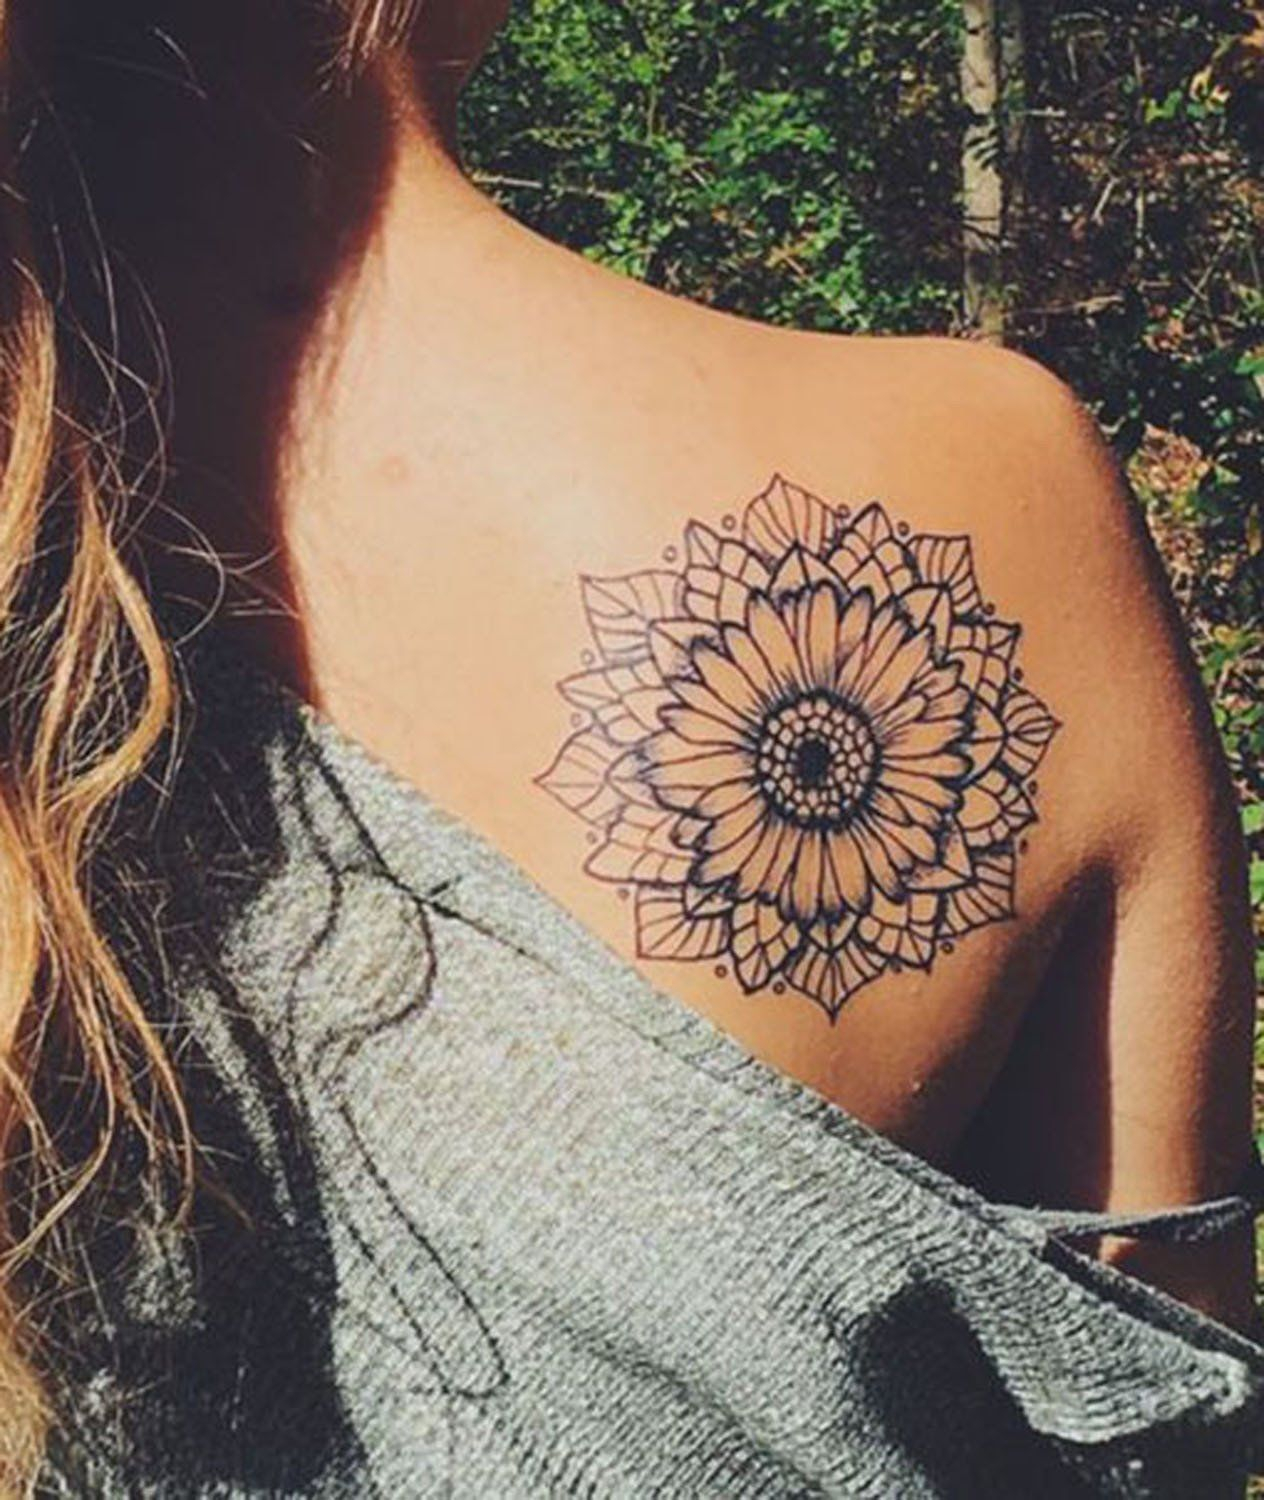 Mandala Sunflower Black And White Back Shoulder Tattoo Ideas At in size 1264 X 1500